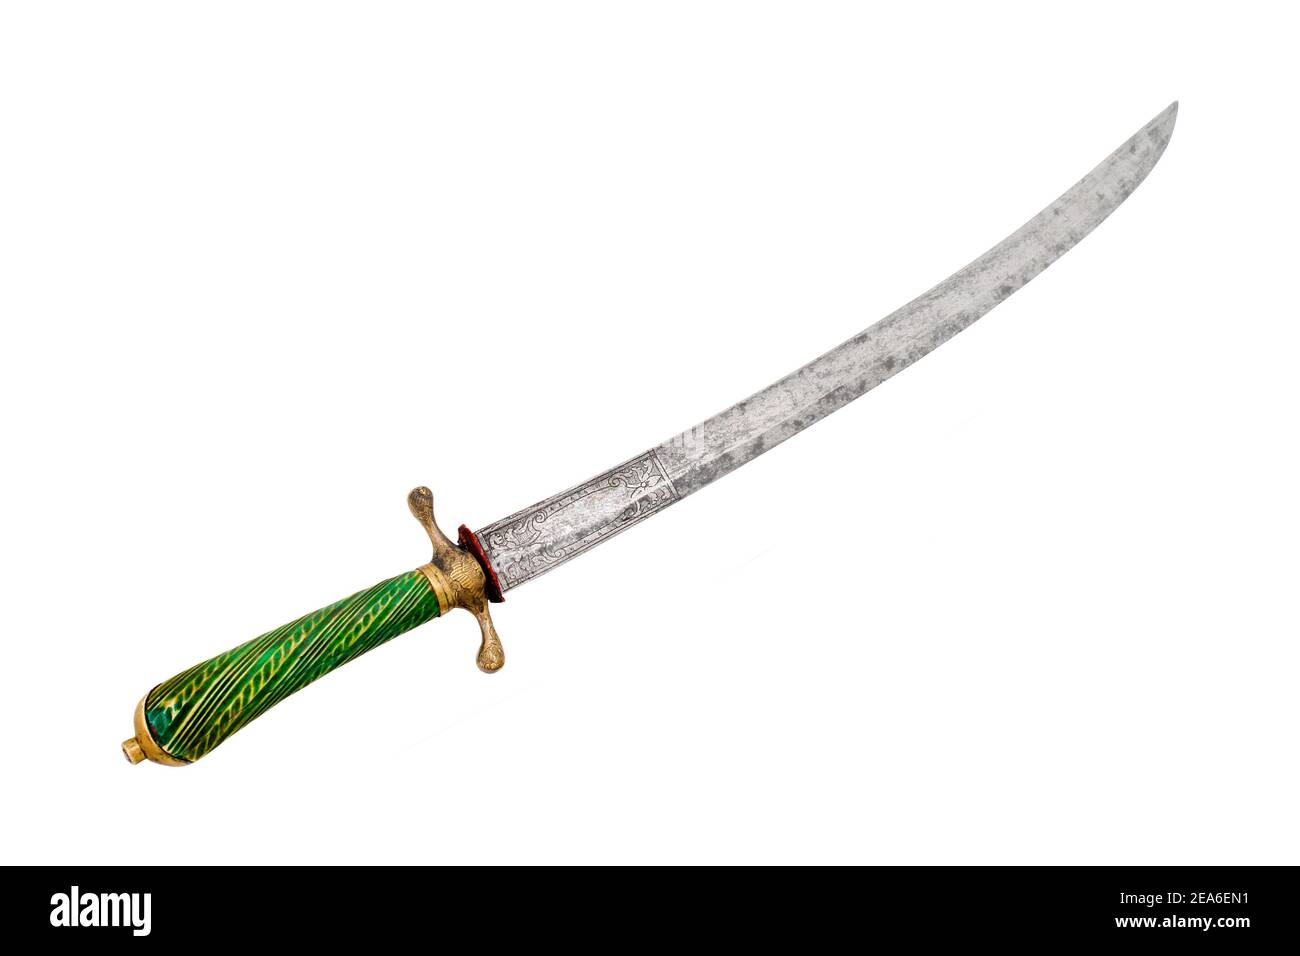 Vintage French huntsman broadsword. France, end of 18th century. Path on white background Stock Photo